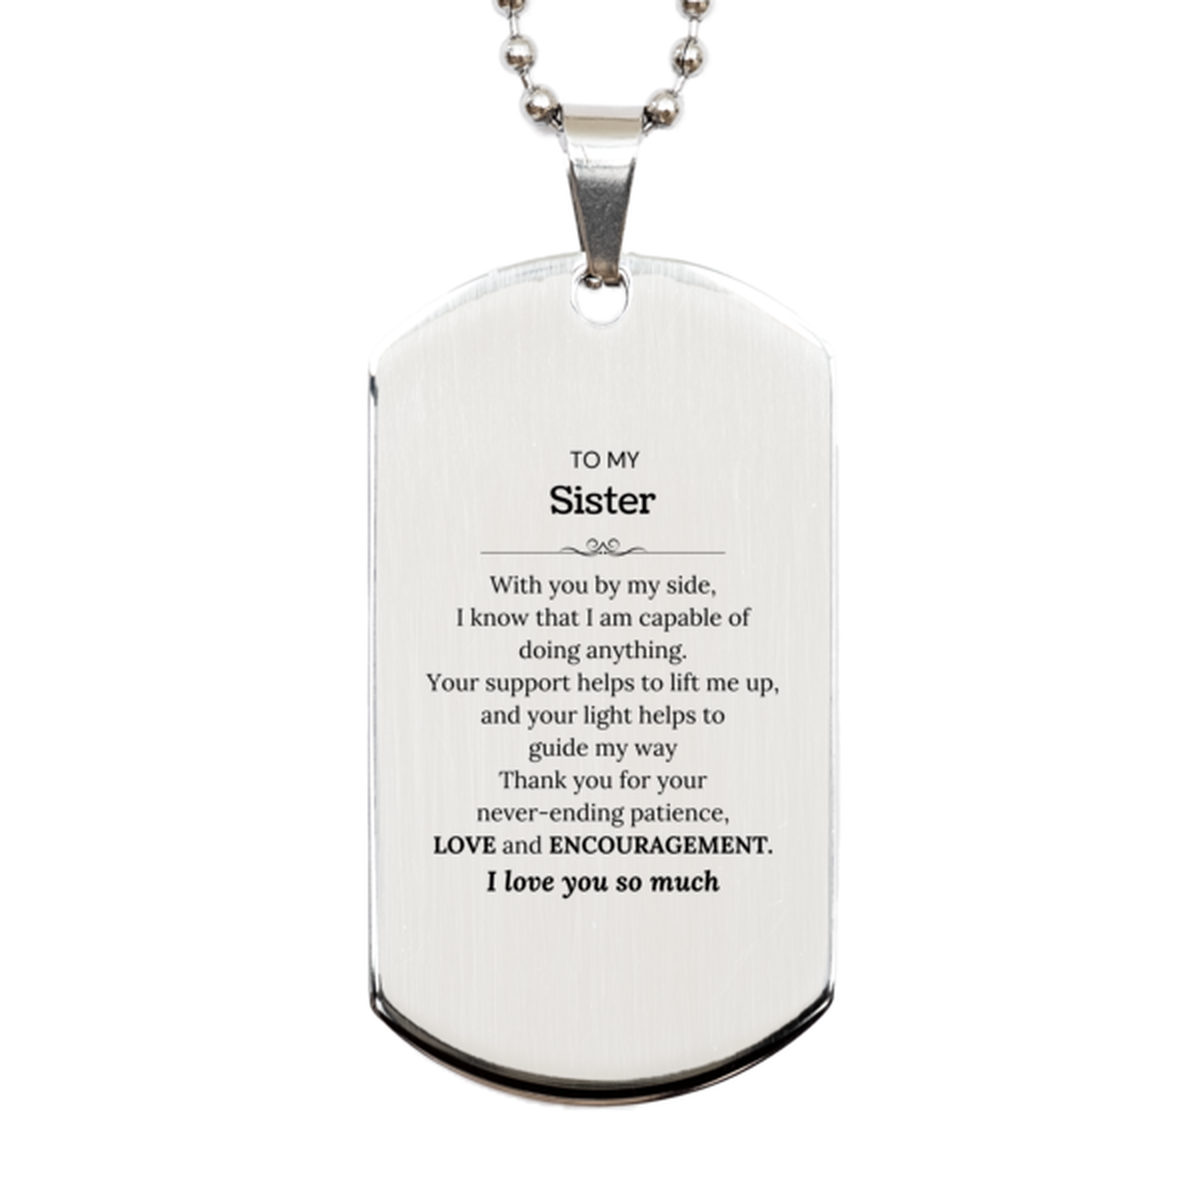 Appreciation Sister Silver Dog Tag Gifts, To My Sister Birthday Christmas Wedding Keepsake Gifts for Sister With you by my side, I know that I am capable of doing anything. I love you so much